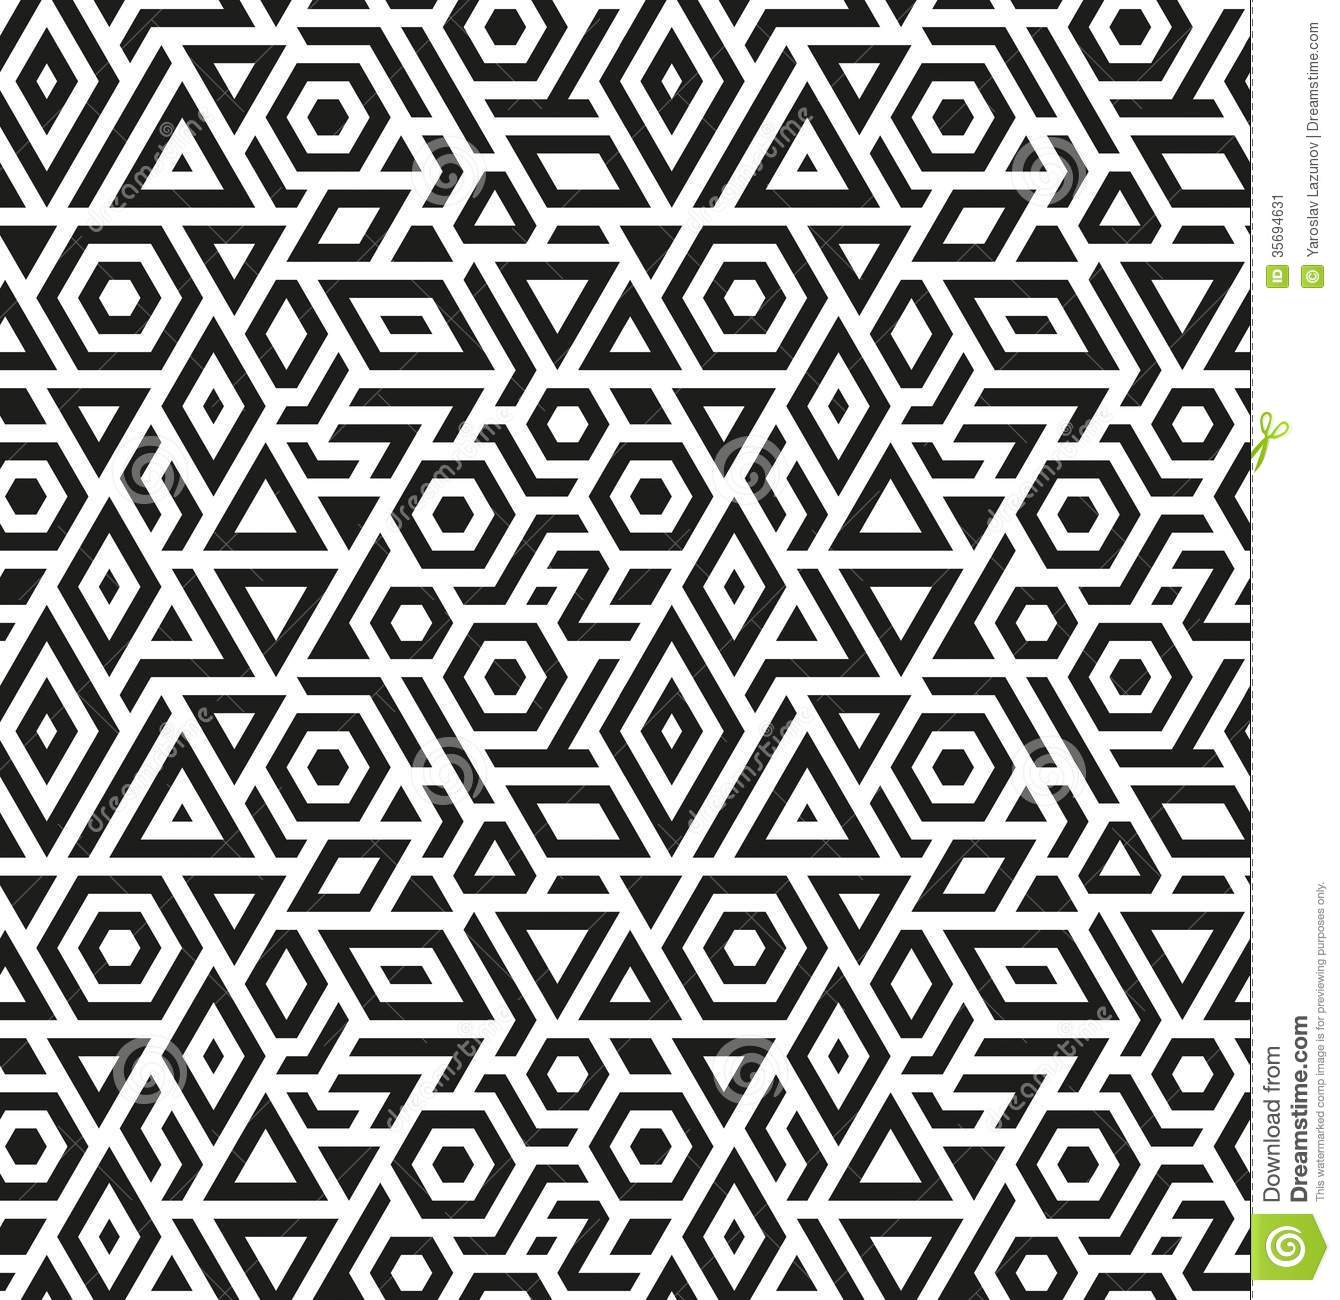 Geometric Design Vector At Collection Of Geometric